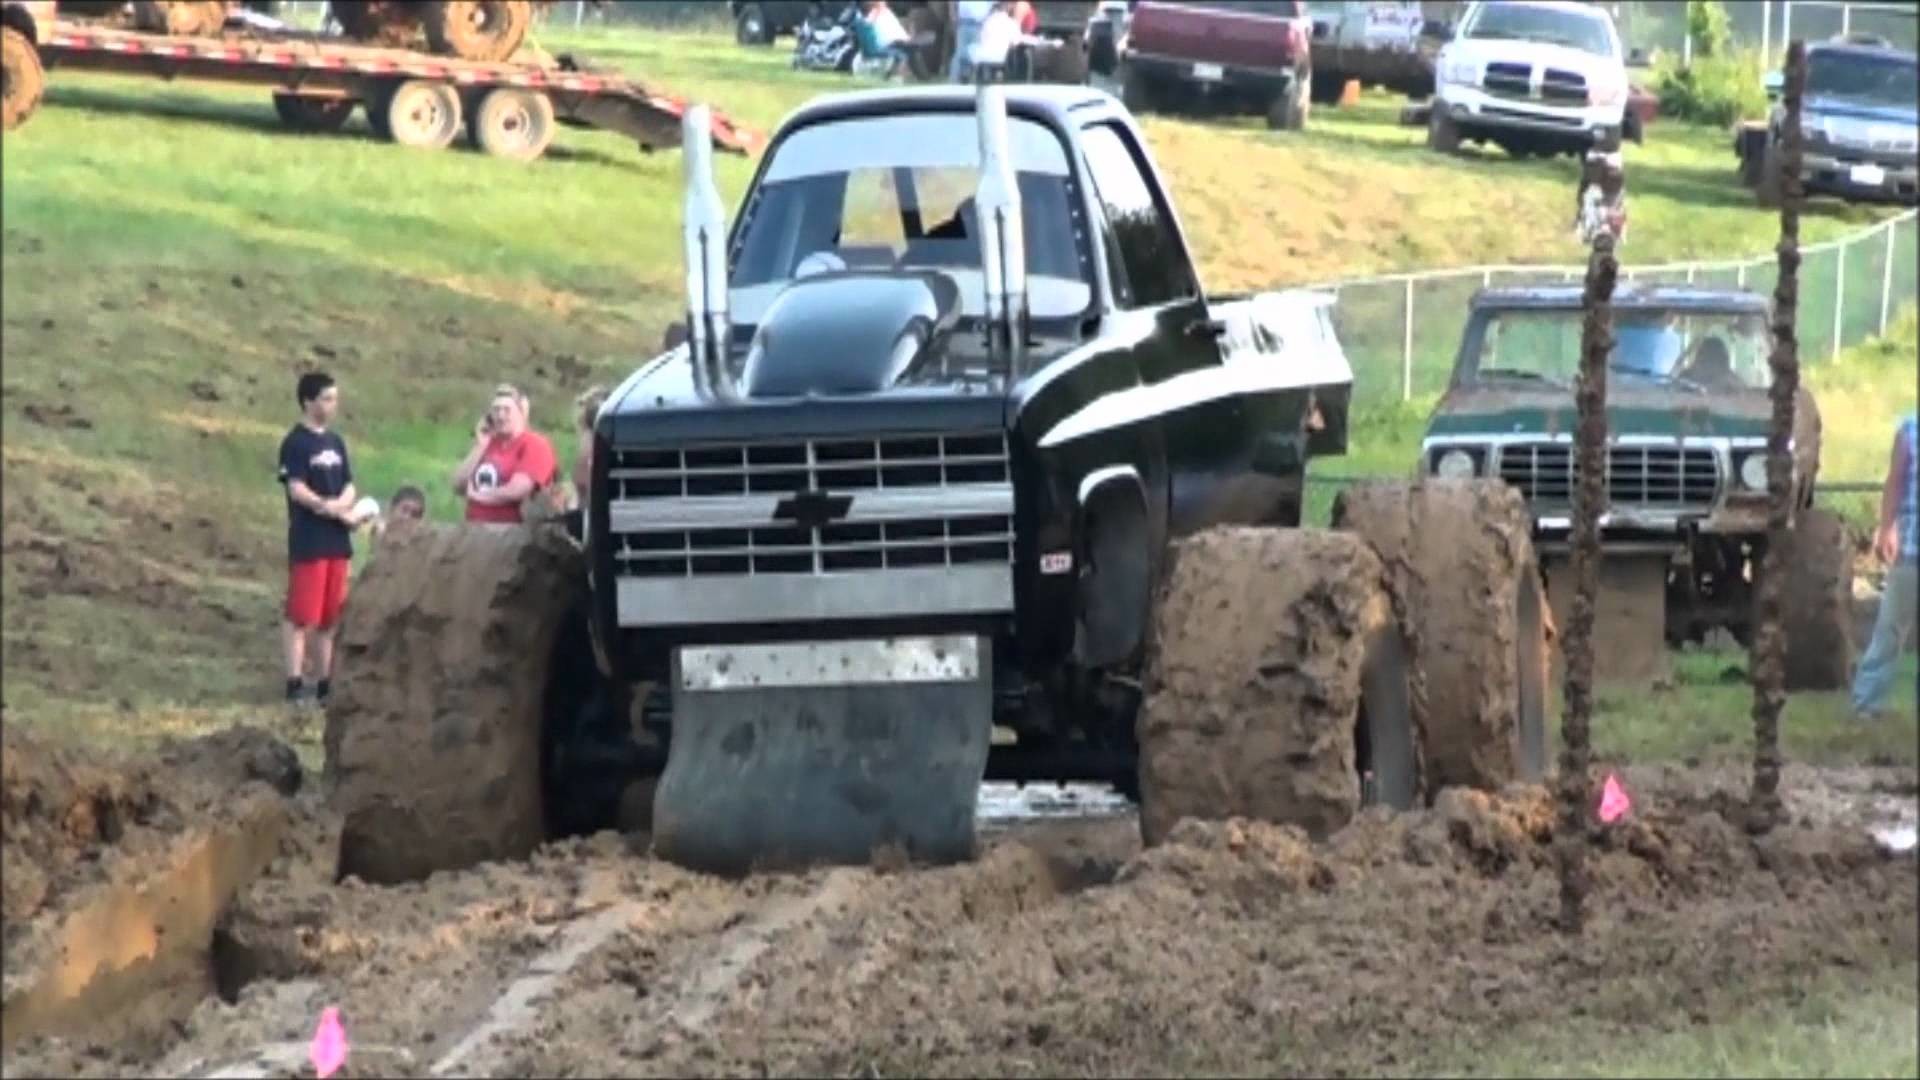 1920x1080 Custom Chevy Mud Truck Destroys a SM-465 With A SBC On The Bottle - YouTube